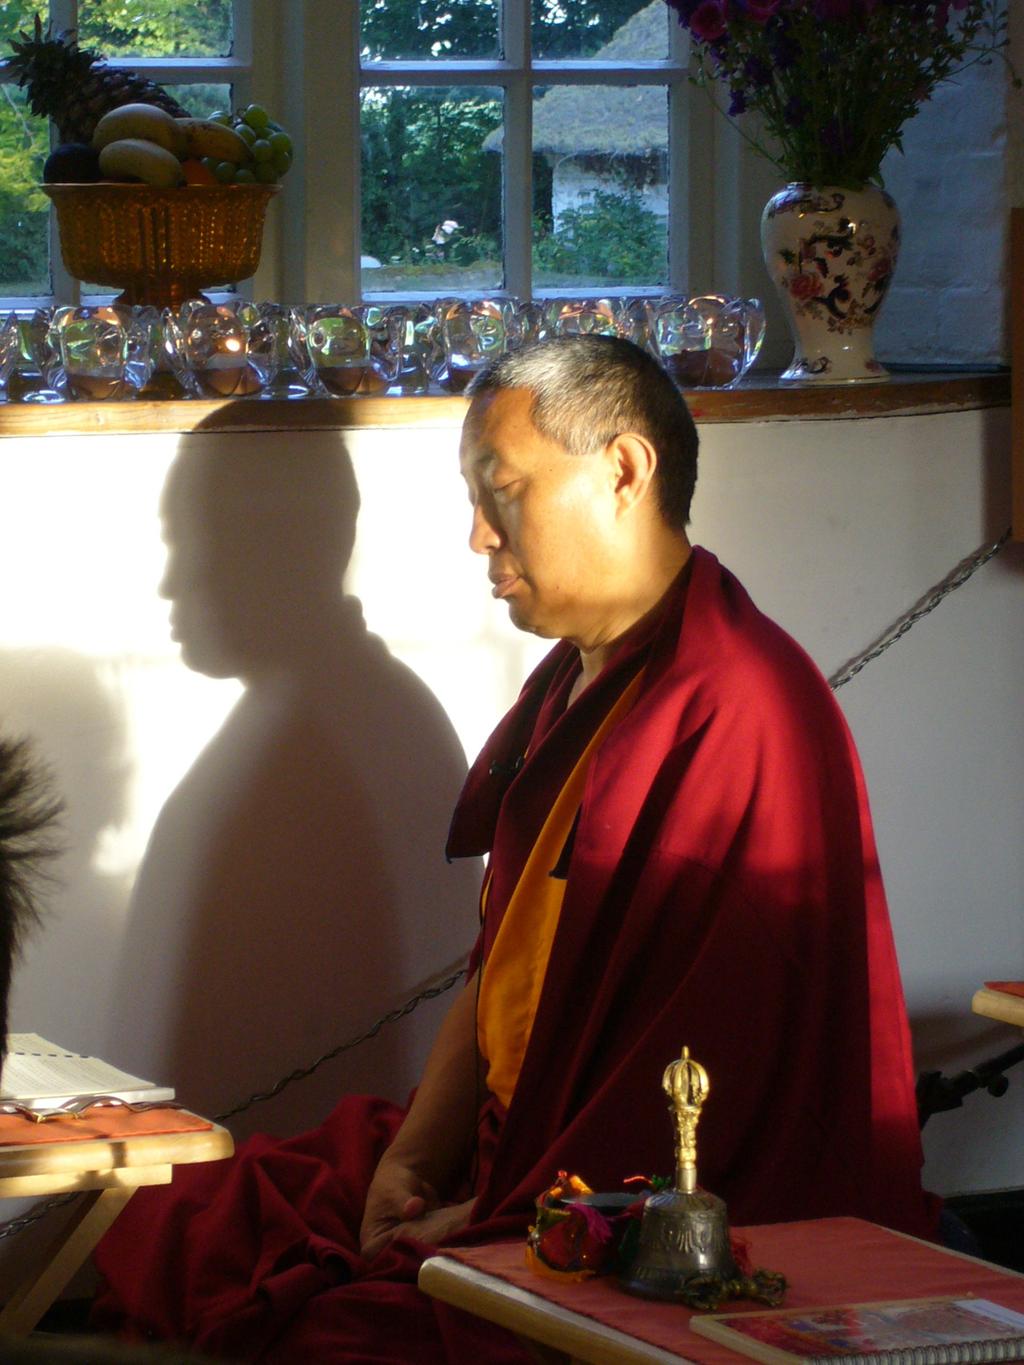 What was the purpose of establishing ordained Sangha?